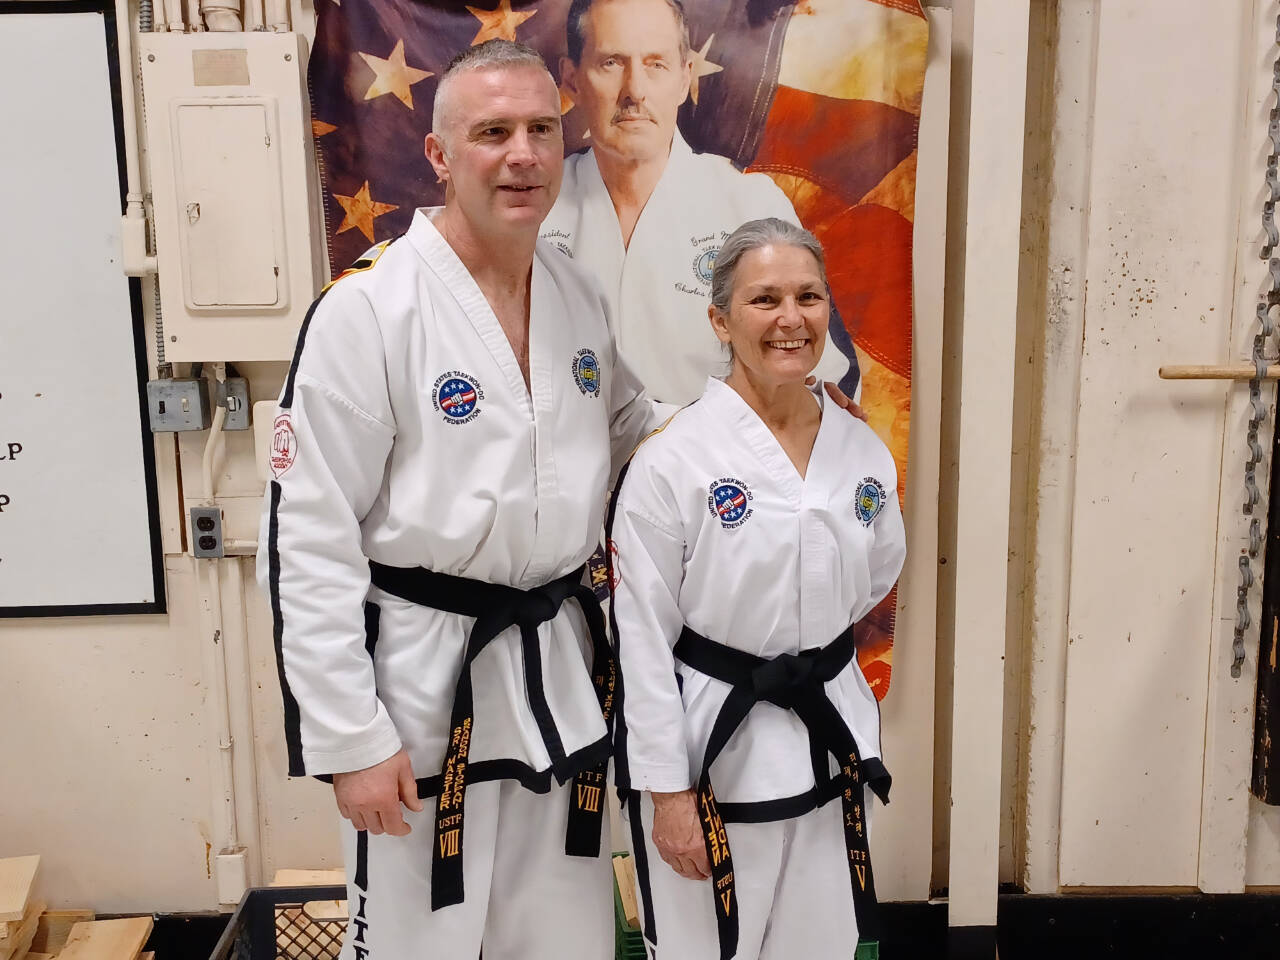 Photo courtesy of Bodystrong Taekwon-do Academy
Instructors Brandon Stoppani and Linda Allen of Sequim’s Bodystrong Taekwon-do Academy earn promotions in their black belts at the United States Taekwon-do Federation in Denver, Colorado, on March 9.